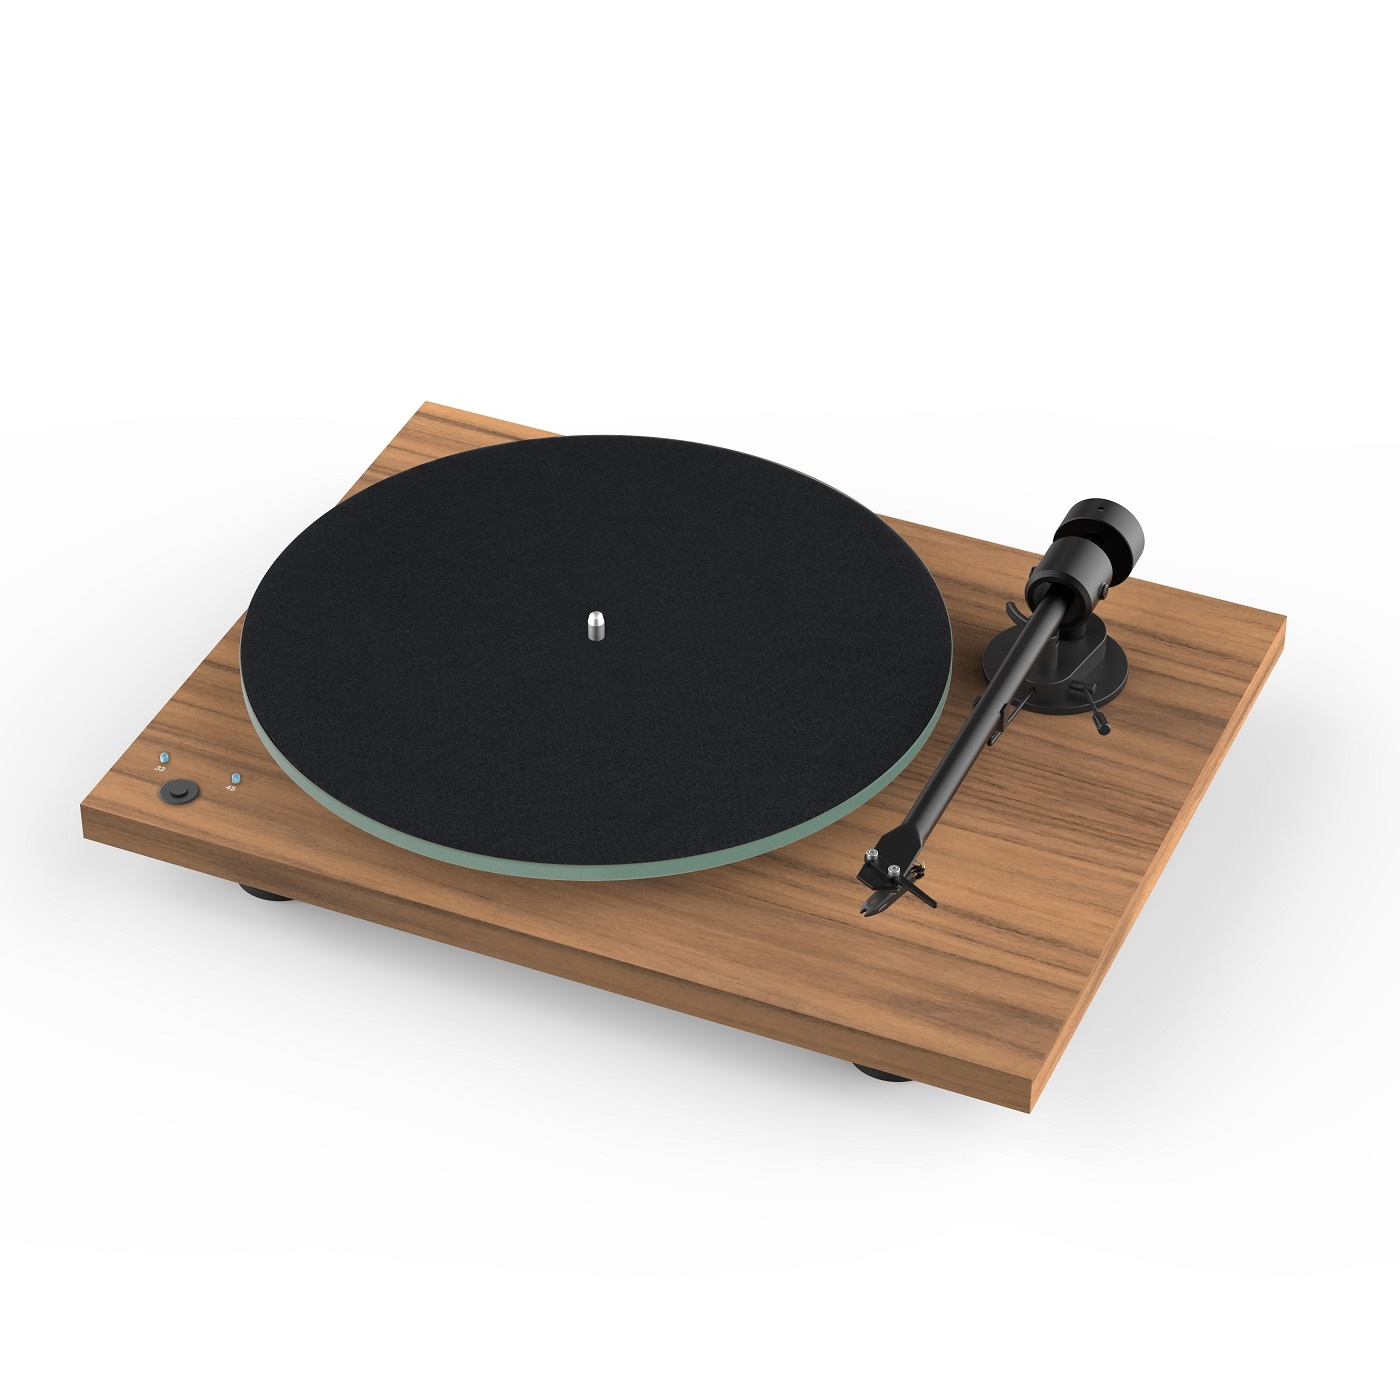 Проигрыватели винила Pro-Ject T1 PHONO SB (OM 5E) walnut one little bear t14 mini mm mc phono stage riaa preamp for lp vinyl turntables record players with 3 5mm headphone out